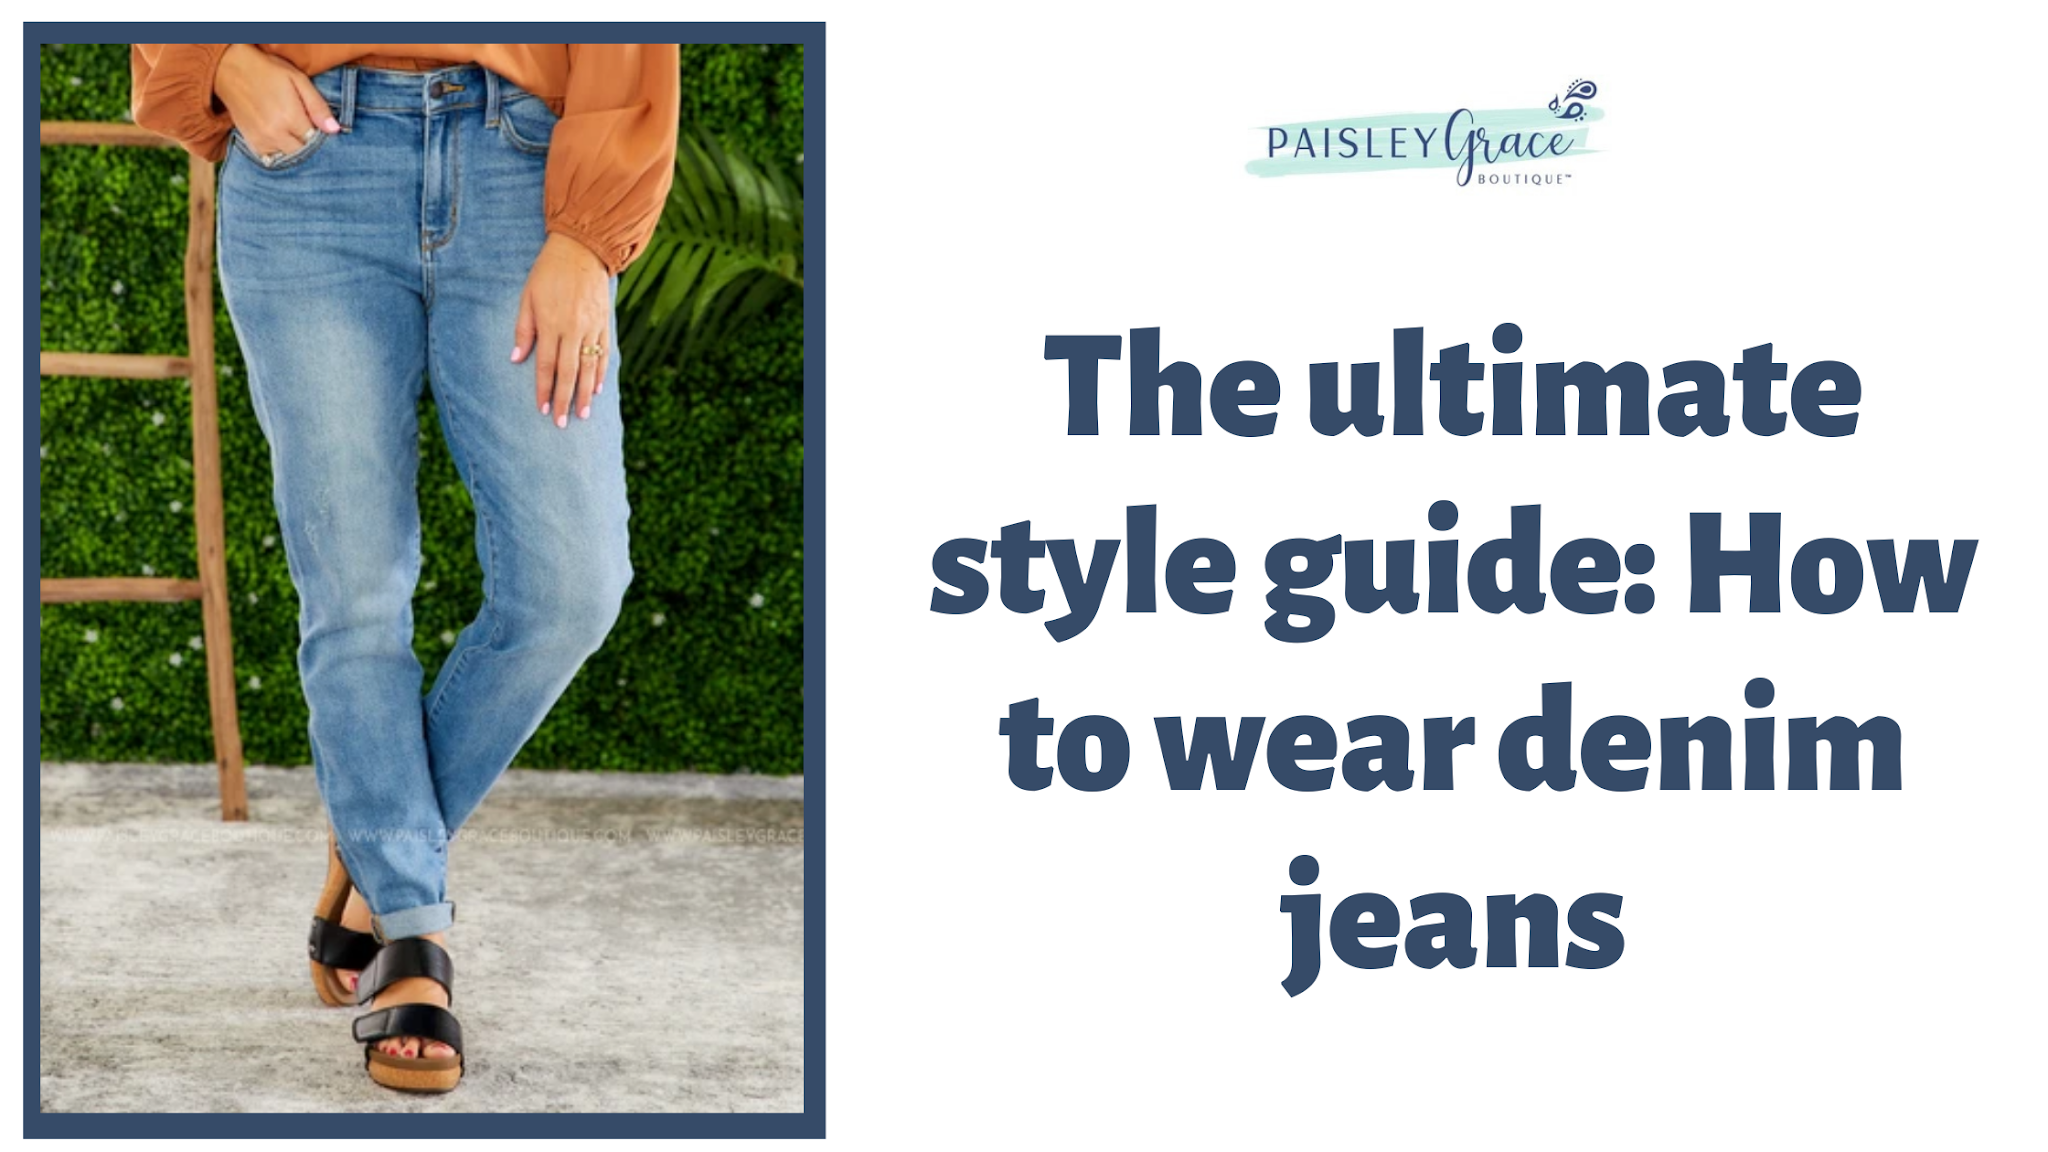 The ultimate style guide: How to wear denim jeans